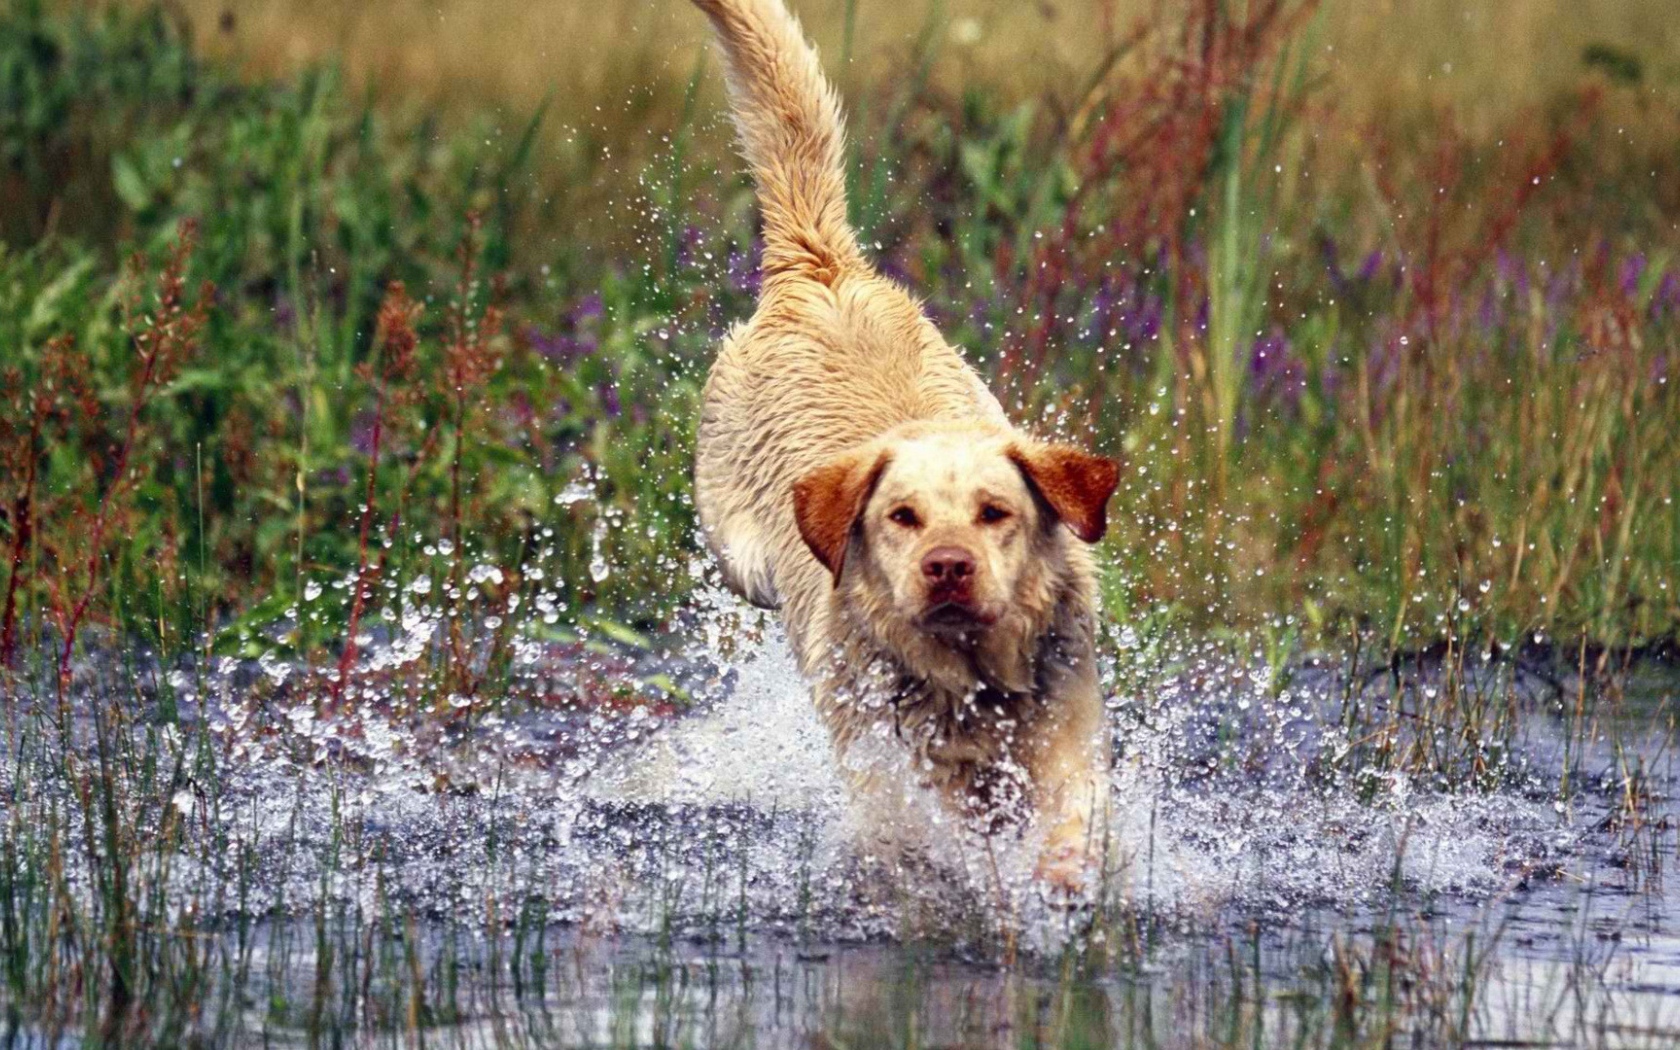 Labrador is thrown into the water